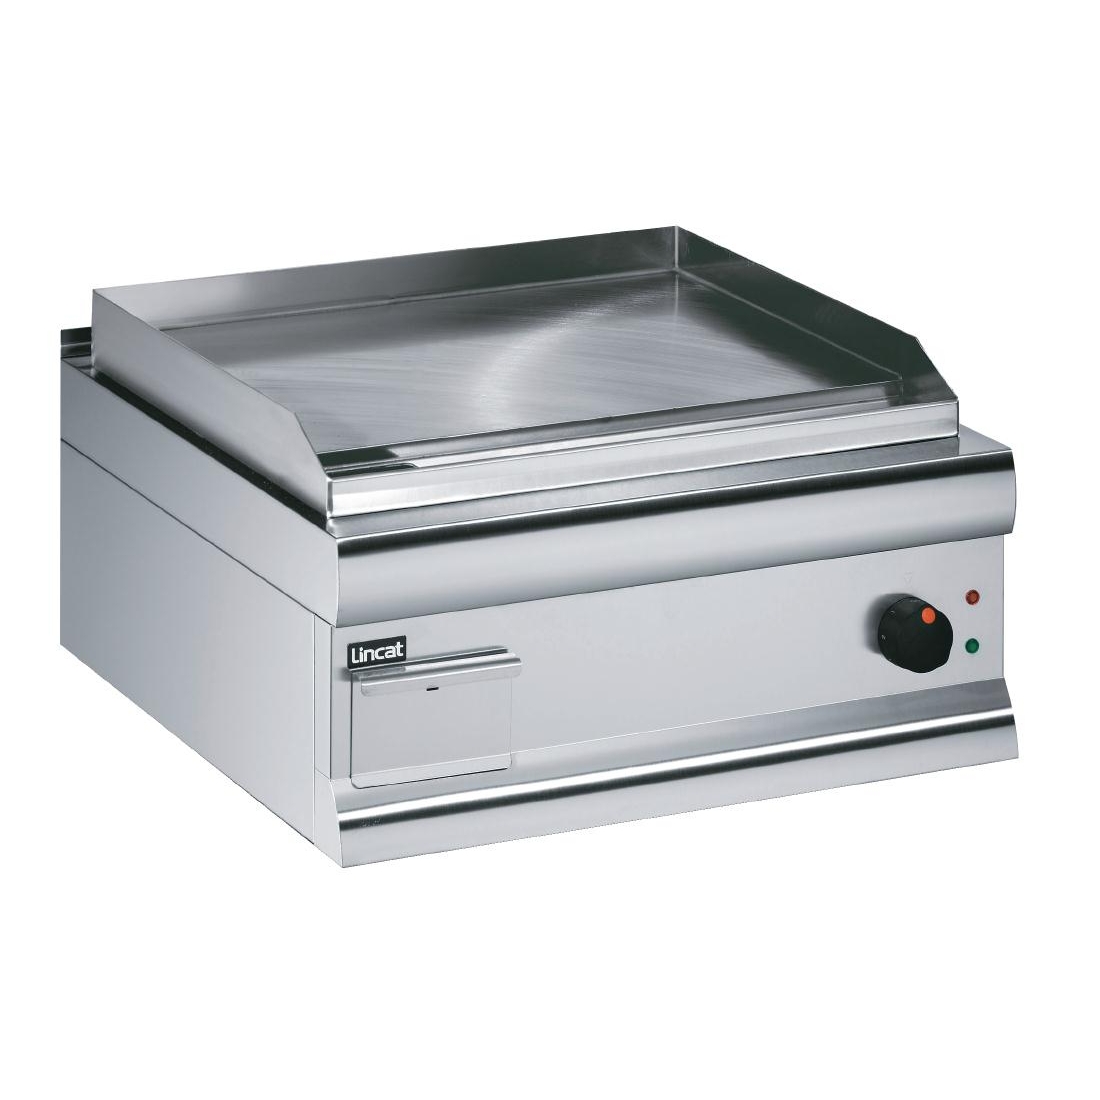 Lincat Silverlink 600 Machined Steel Electric Griddle GS6